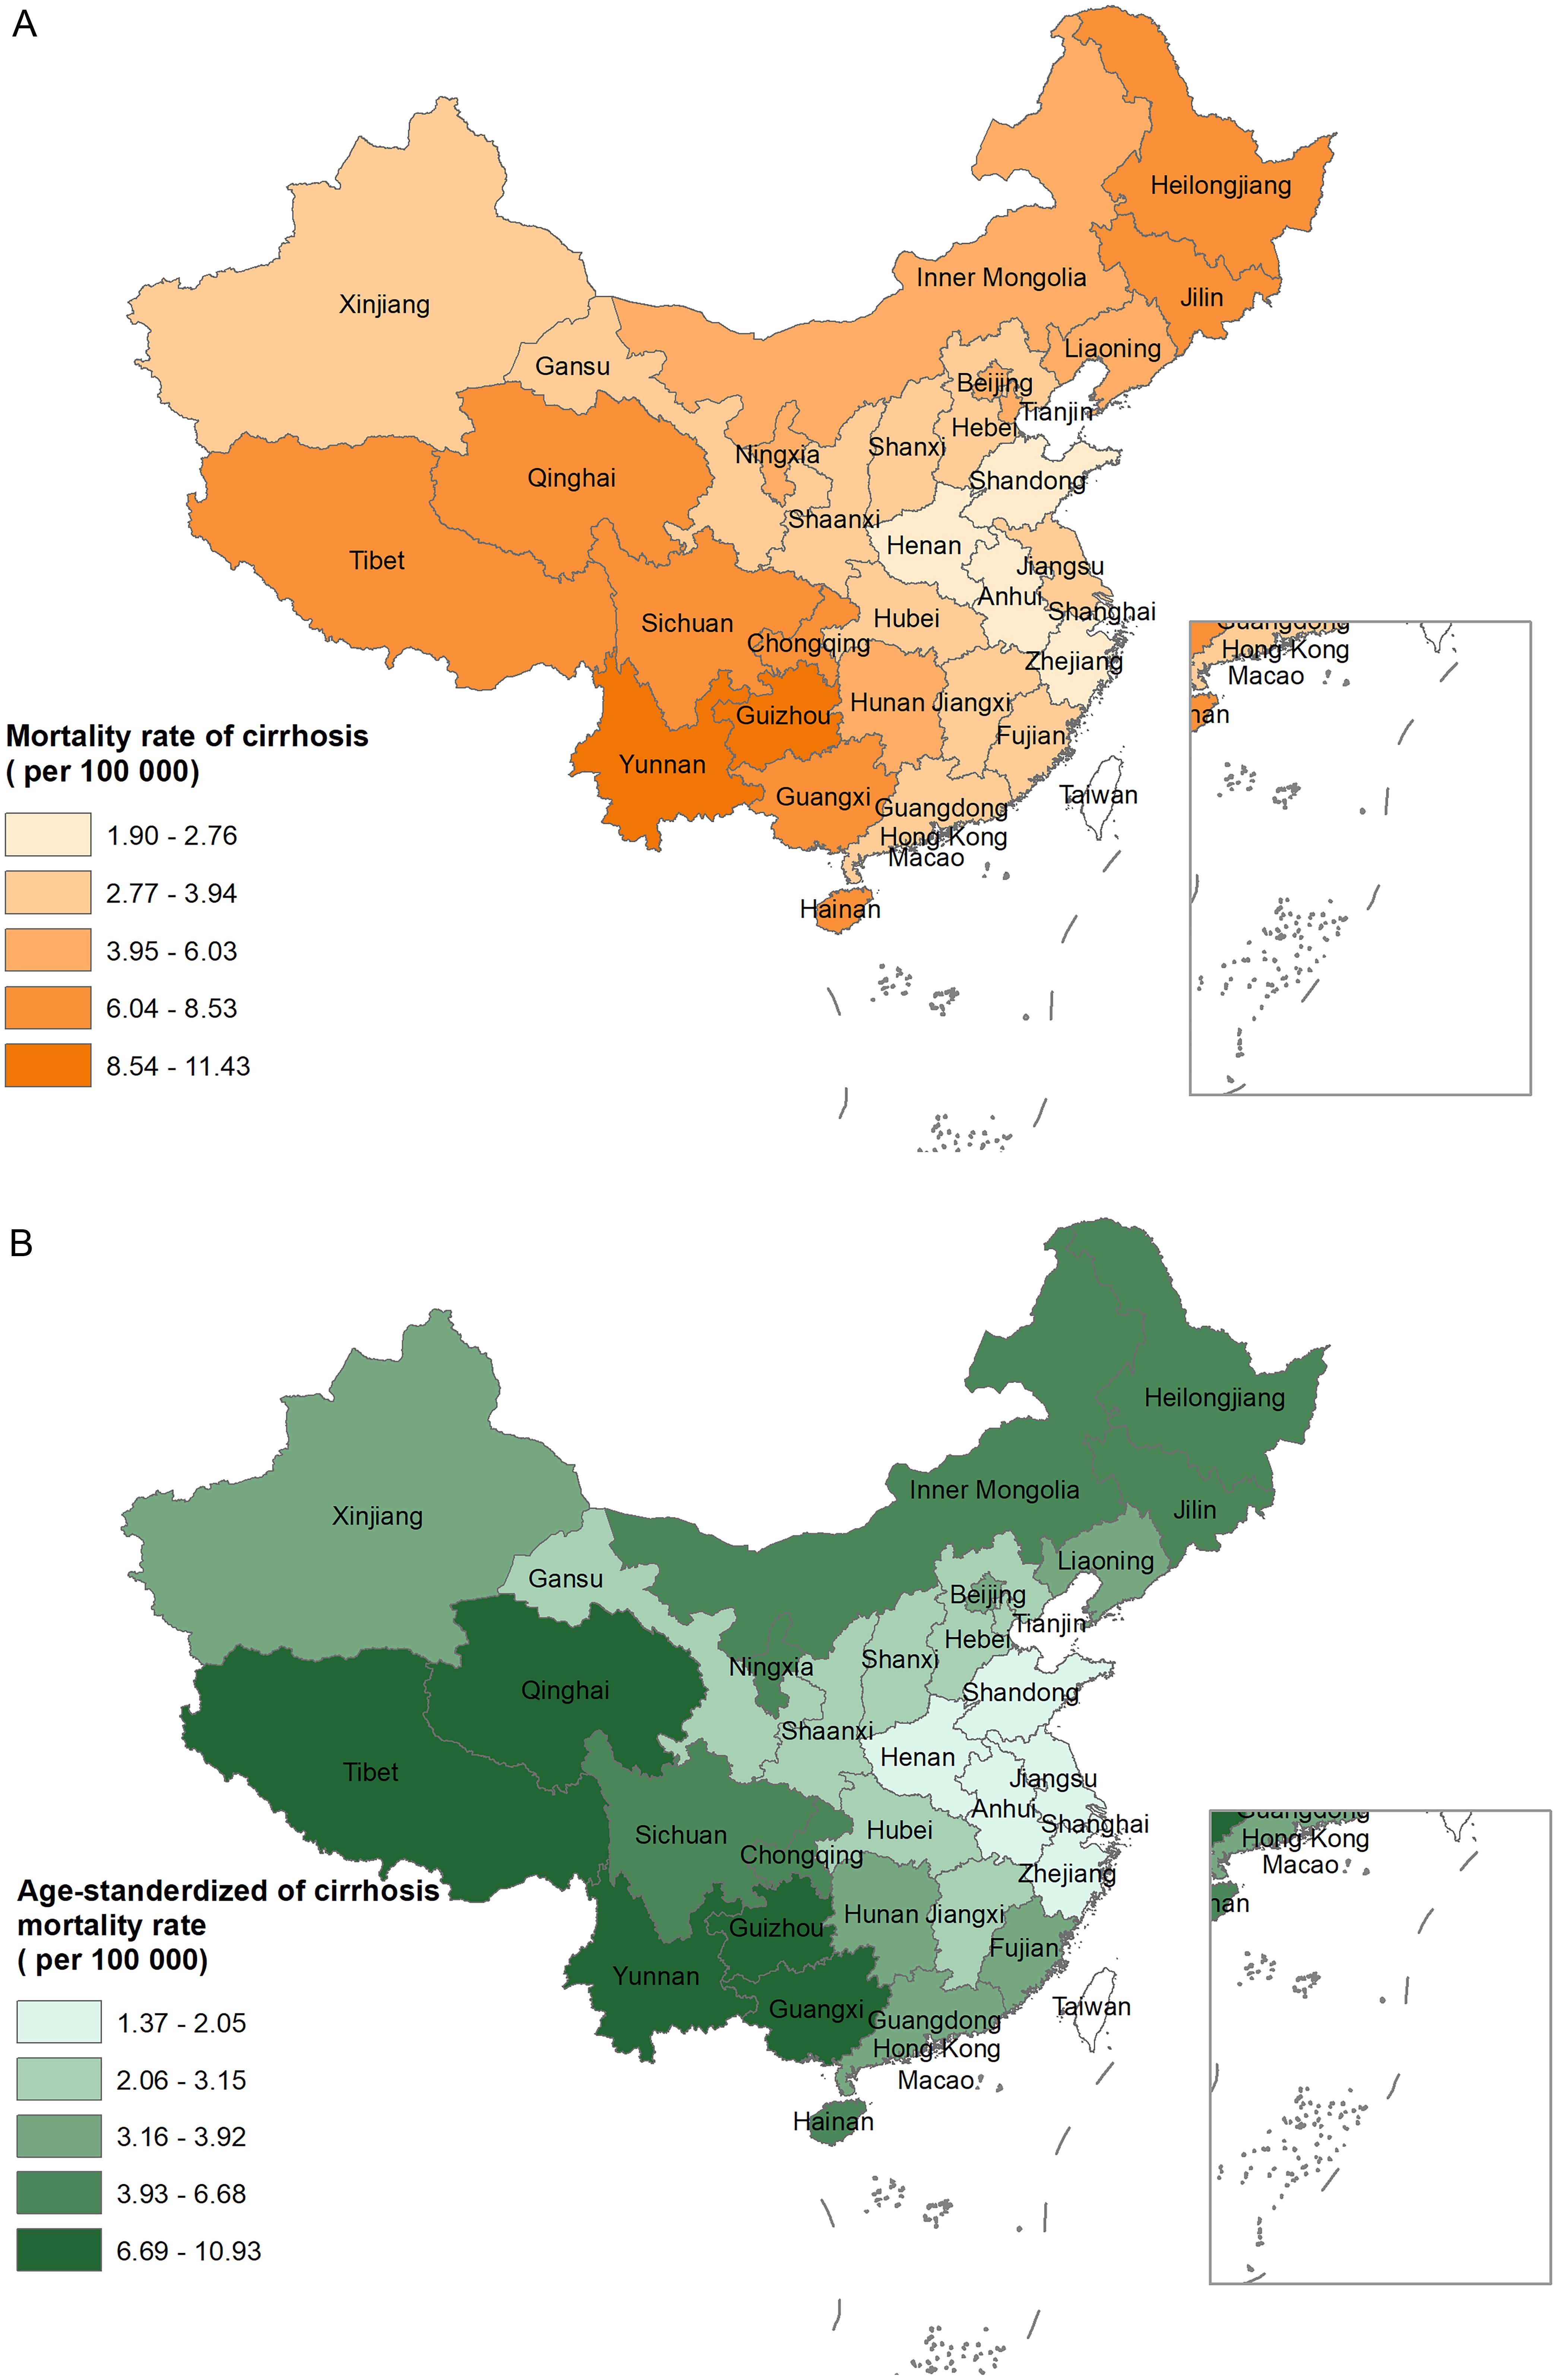 Crude mortality rates and age-standardized mortality rate in China (ASMRC) for both sexes in 2020, by province.